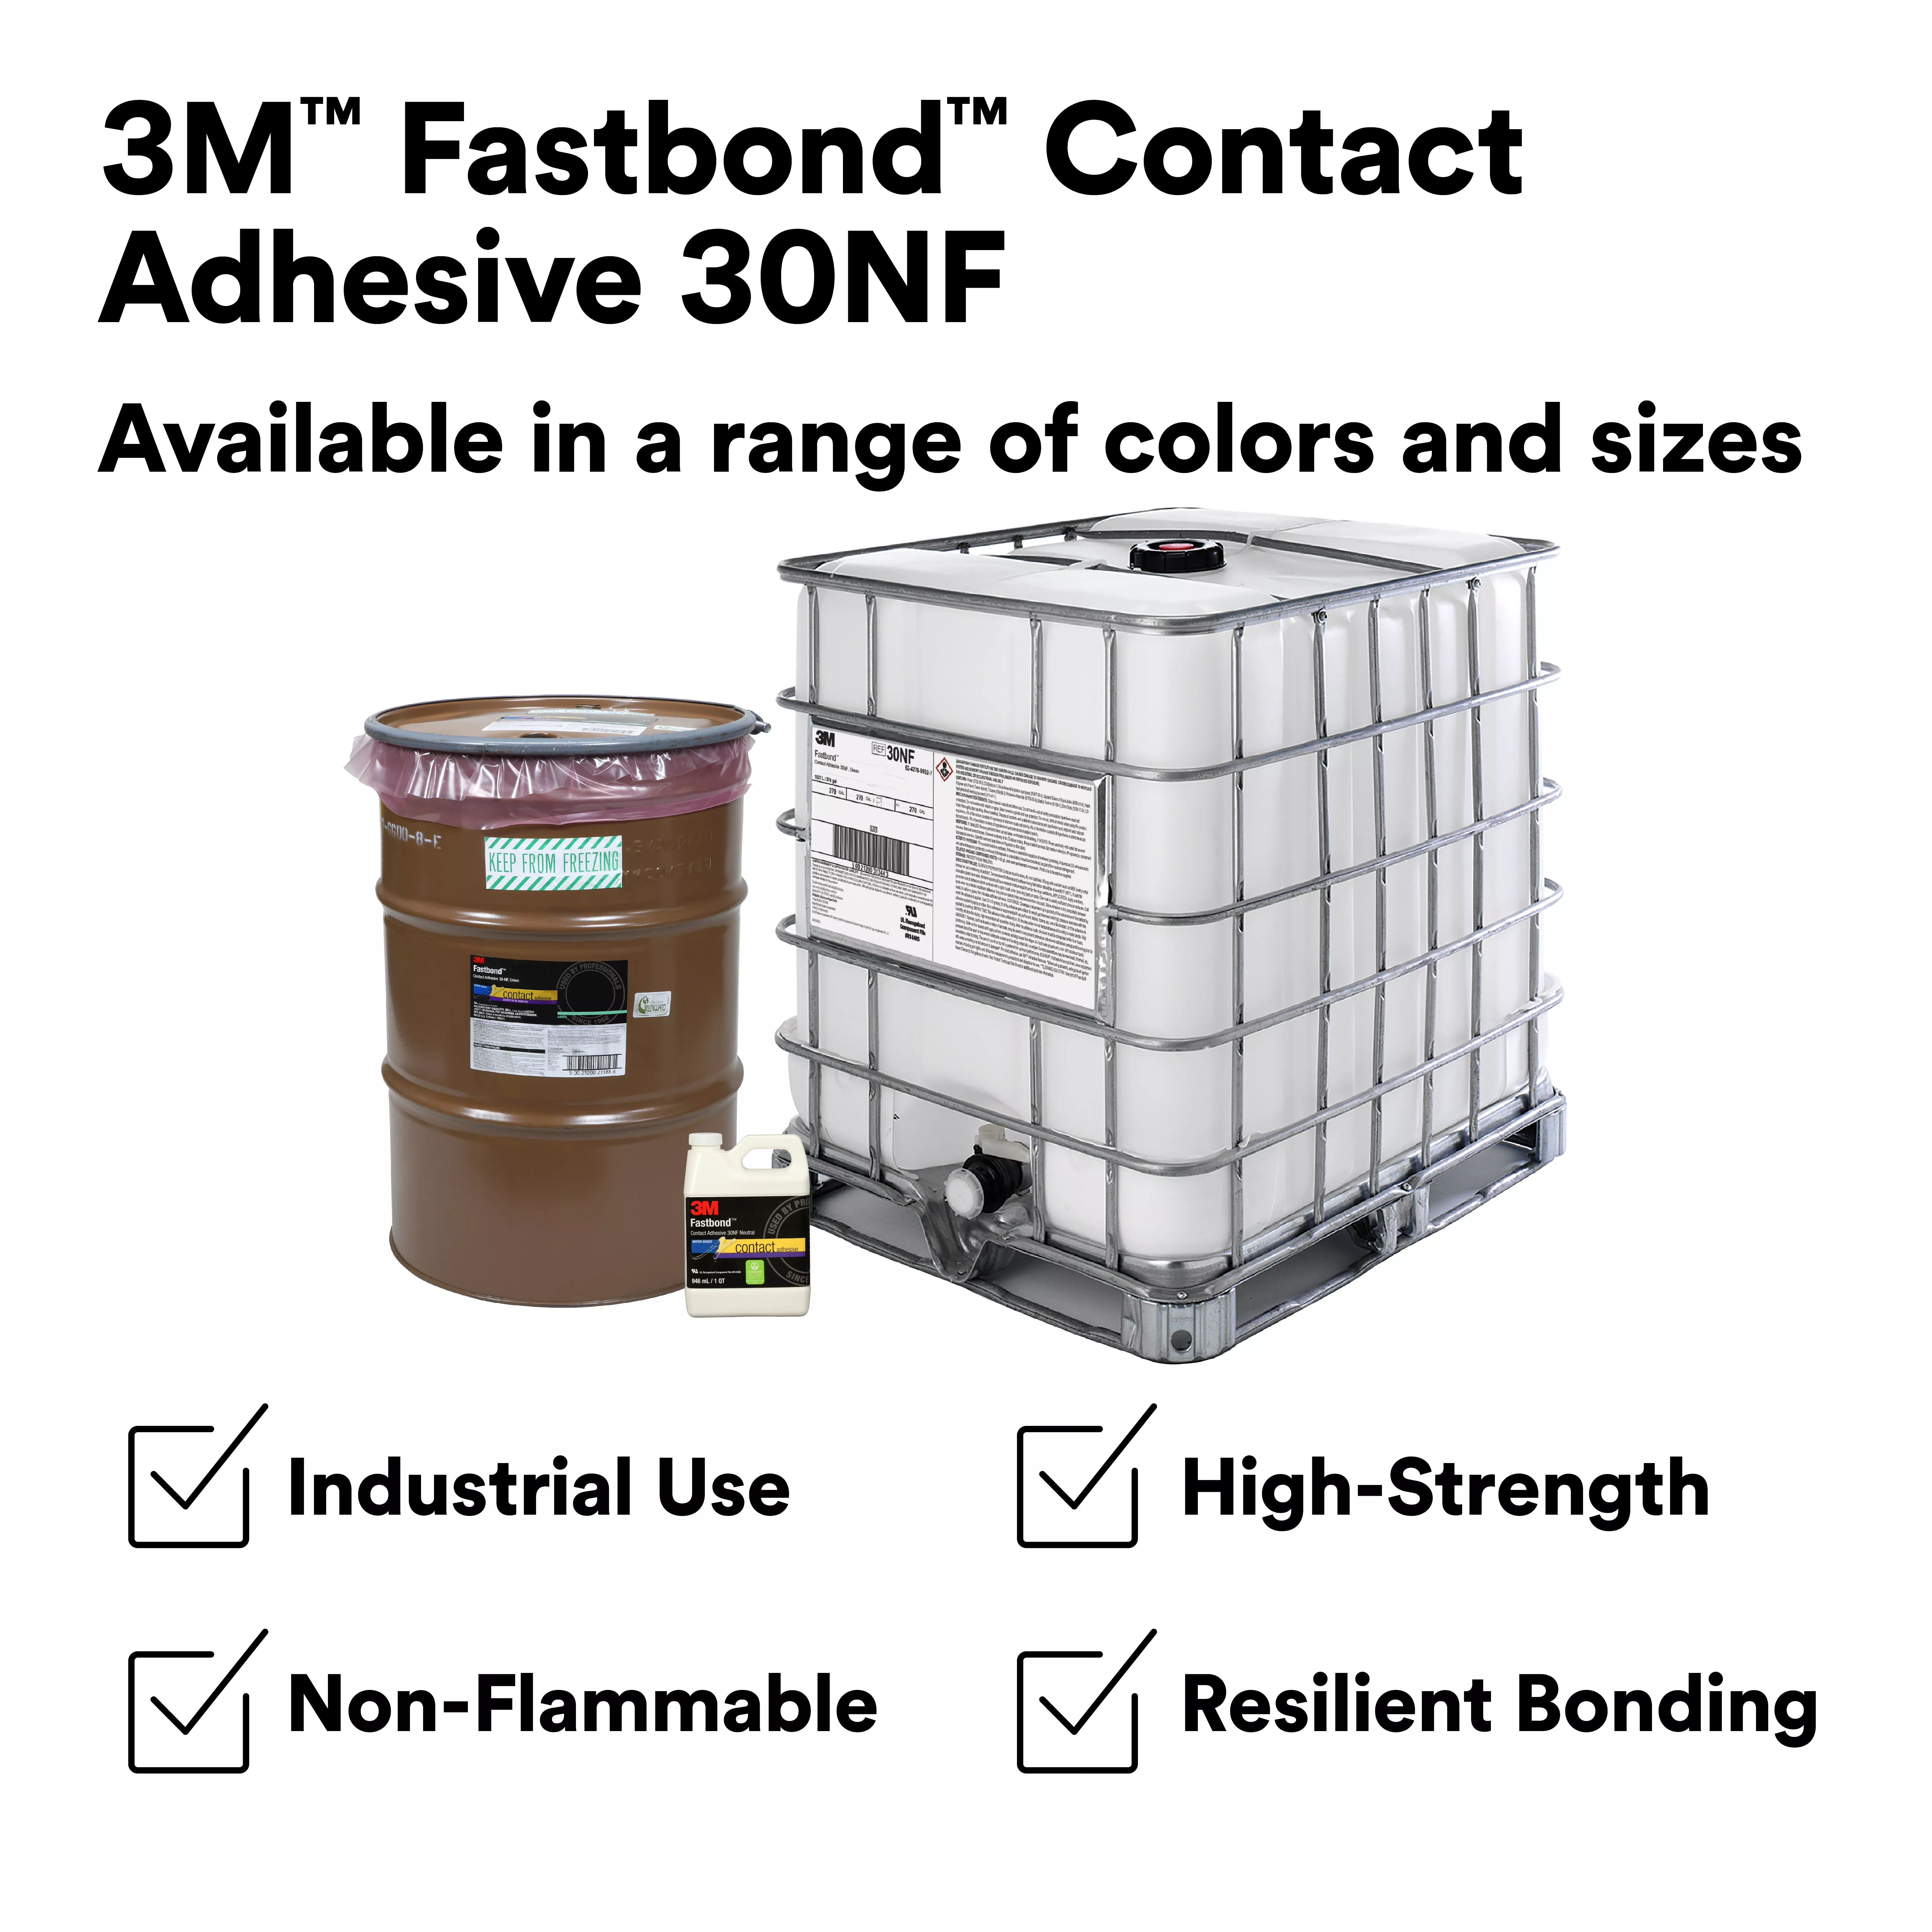 Product Number 30NF | 3M™ Fastbond™ Contact Adhesive 30NF